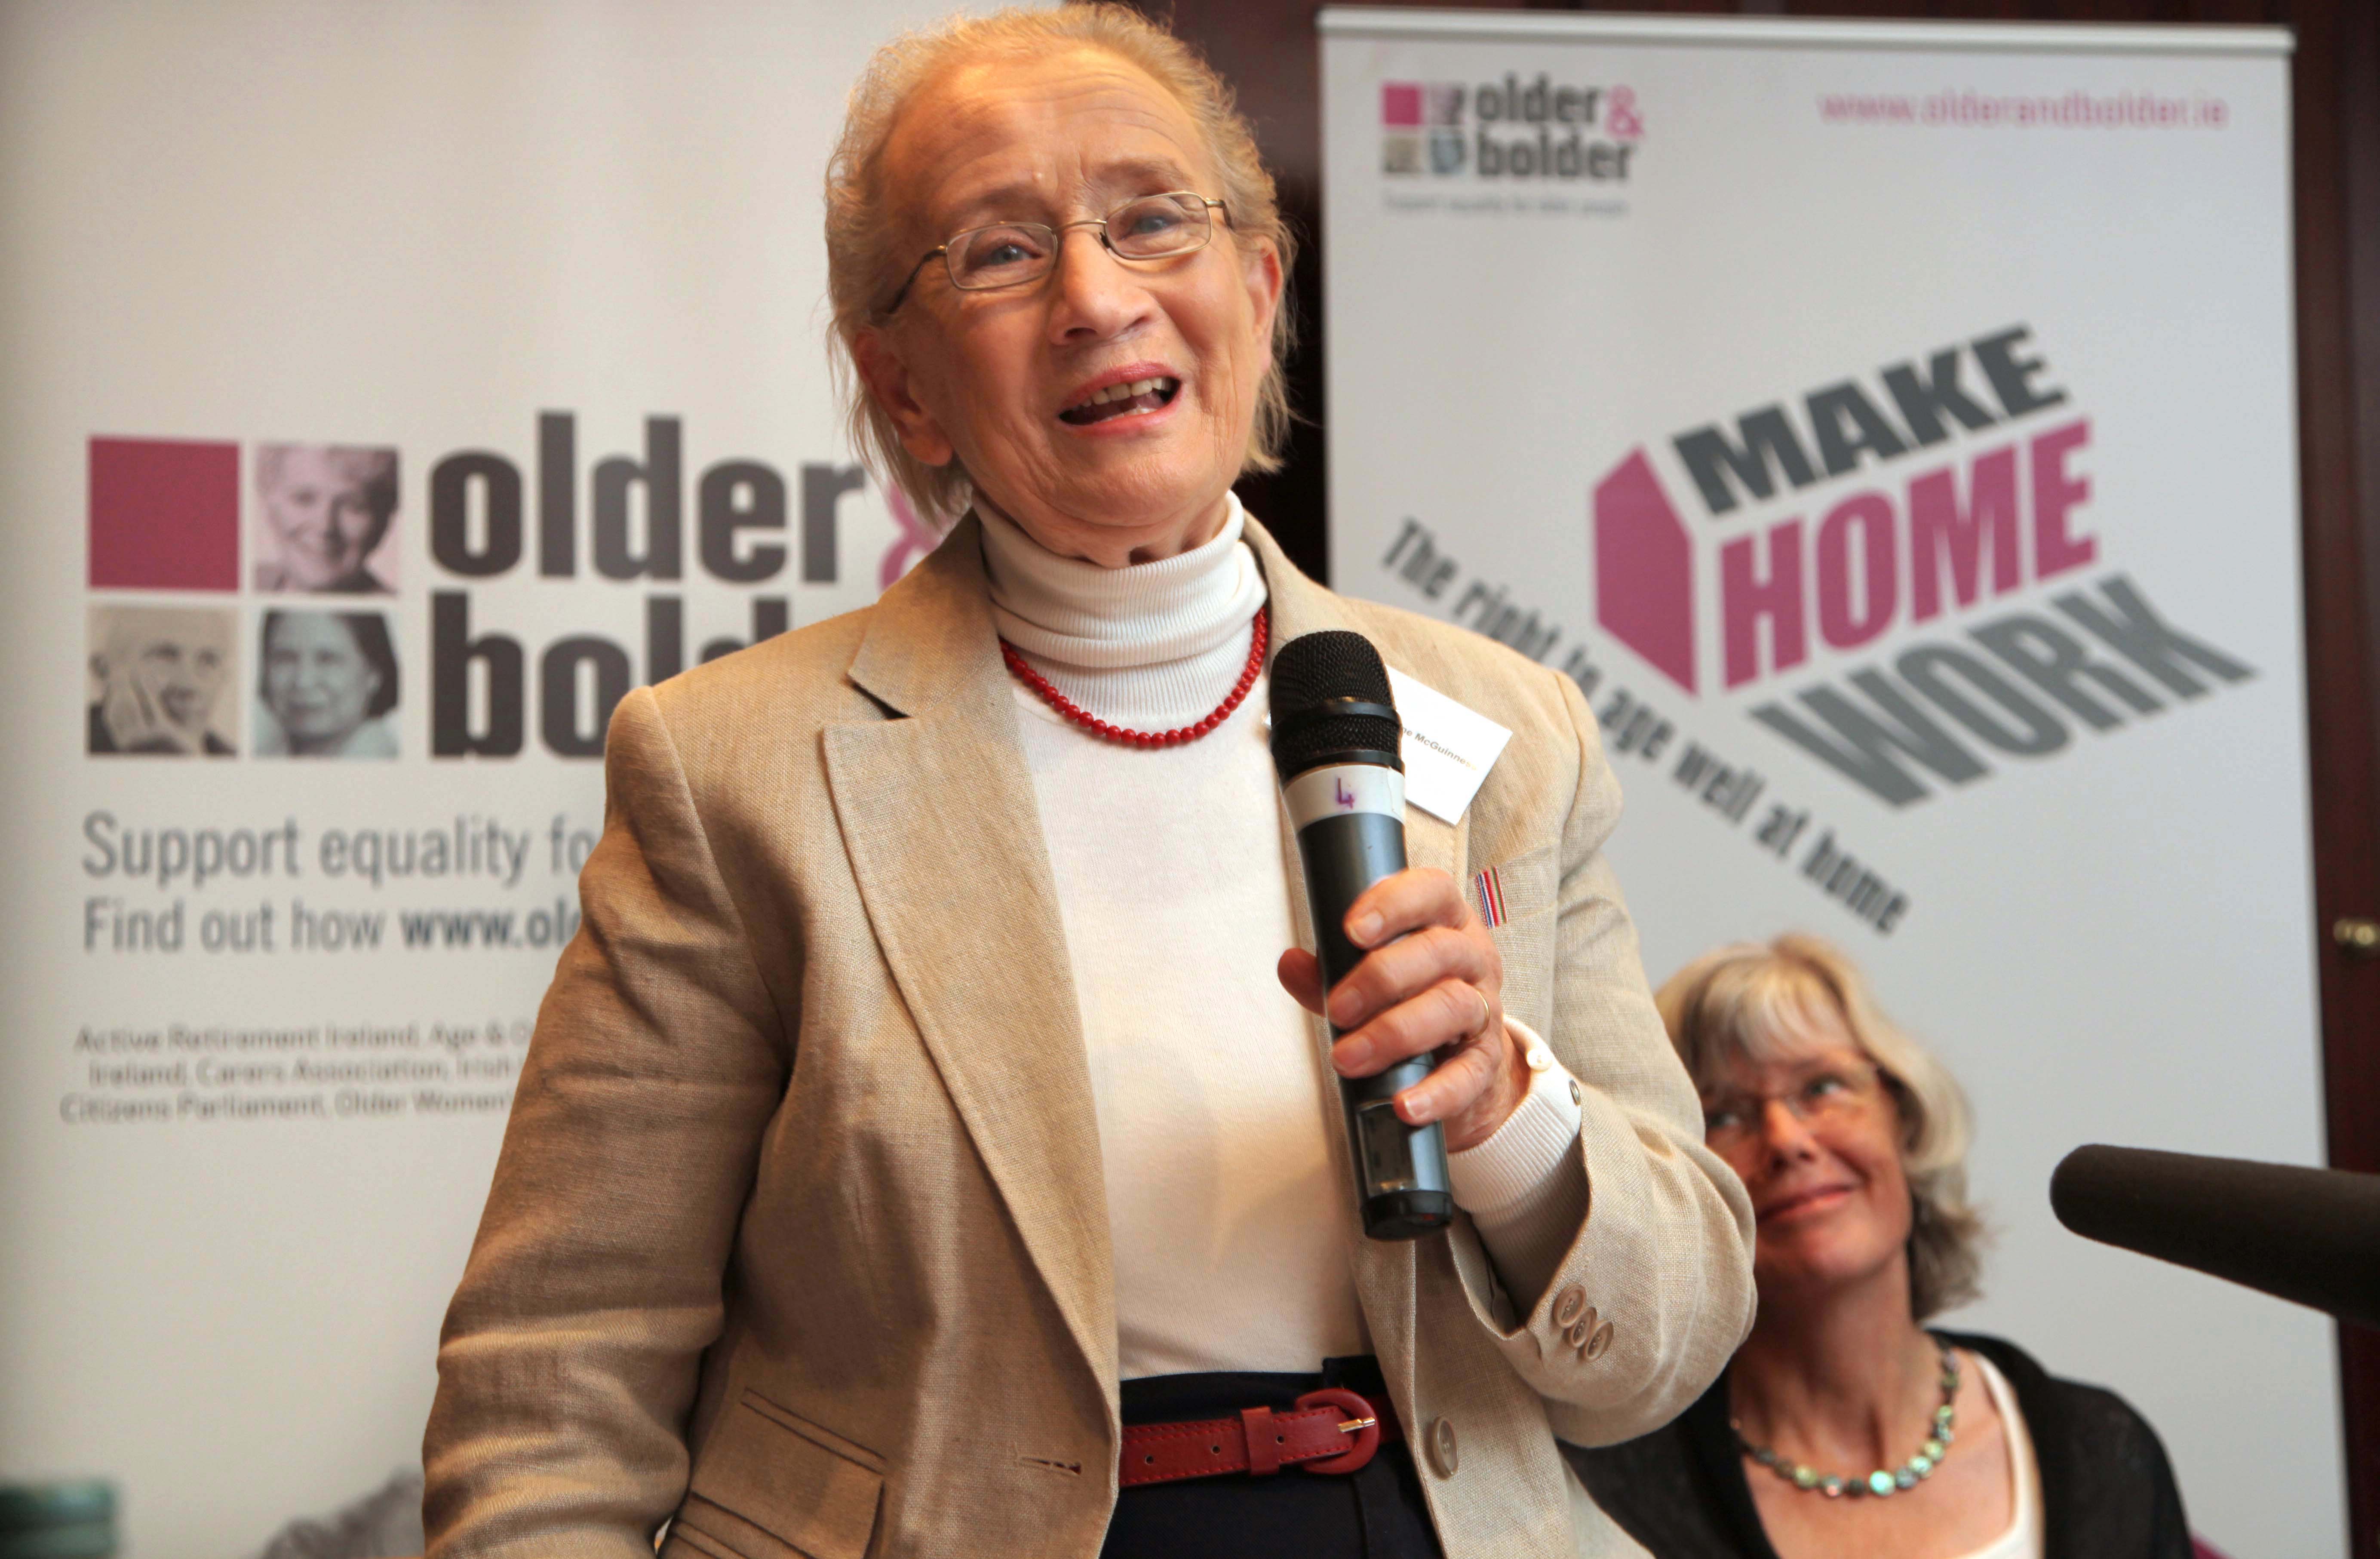 Ms Justice McGuinness introduces Make Home Work Campaign